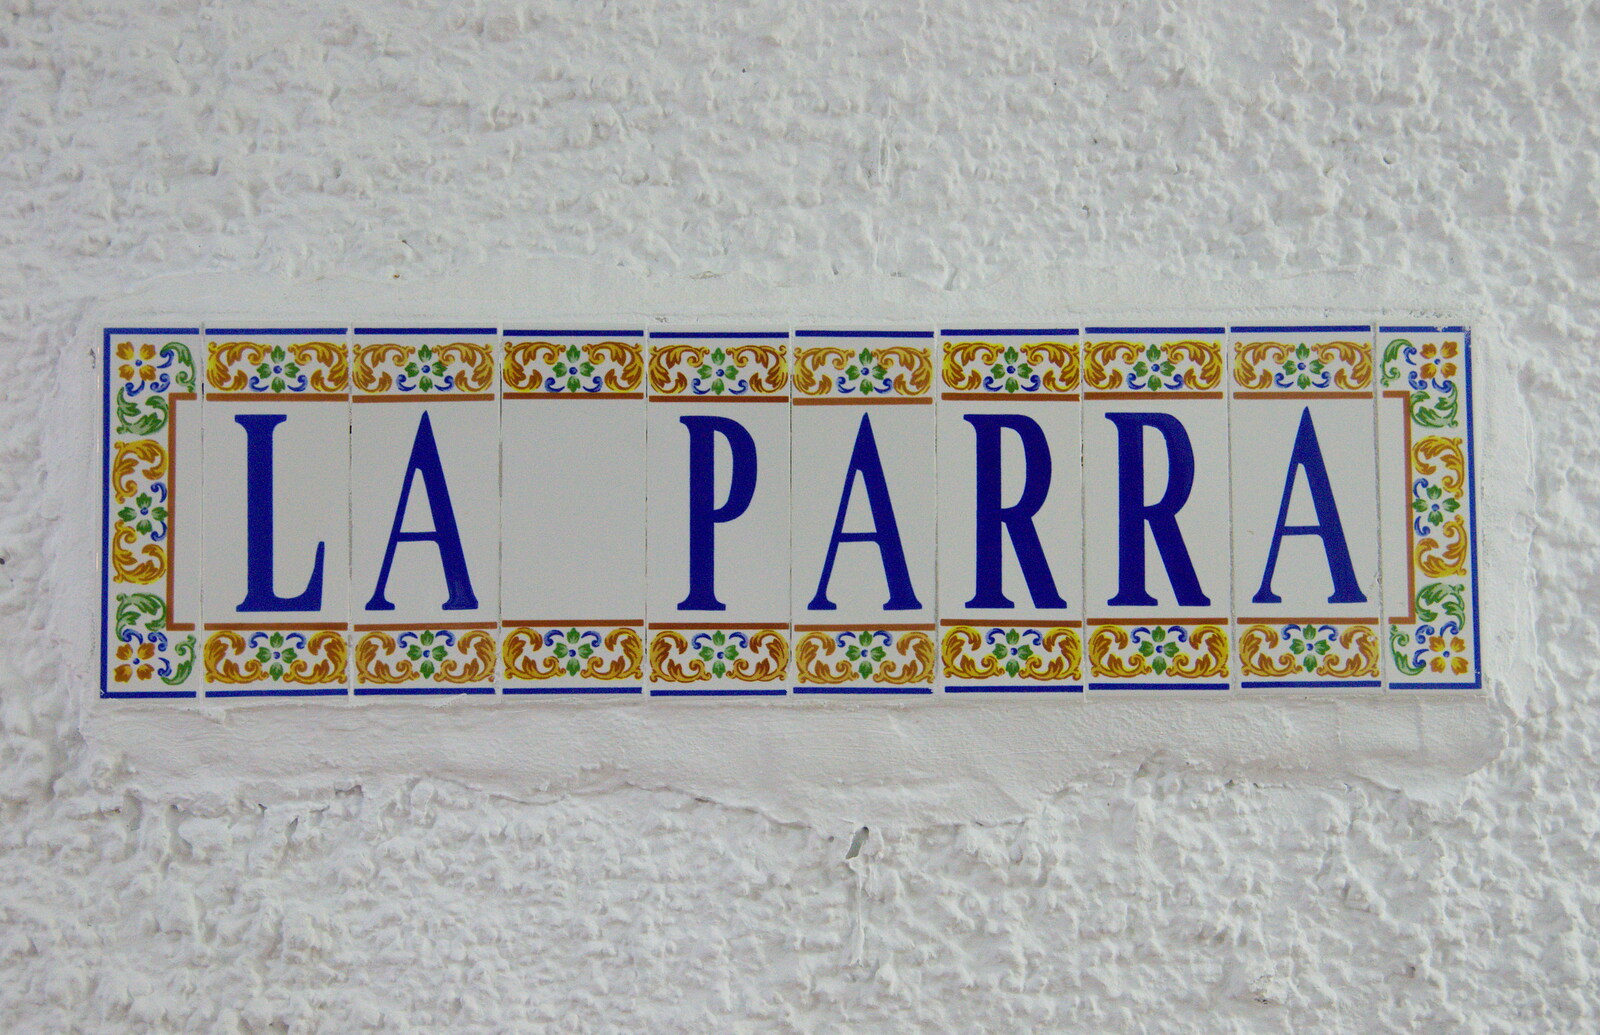 La Parra's tiled sign from An Easter Parade, Nerja, Andalusia, Spain - 21st April 2019